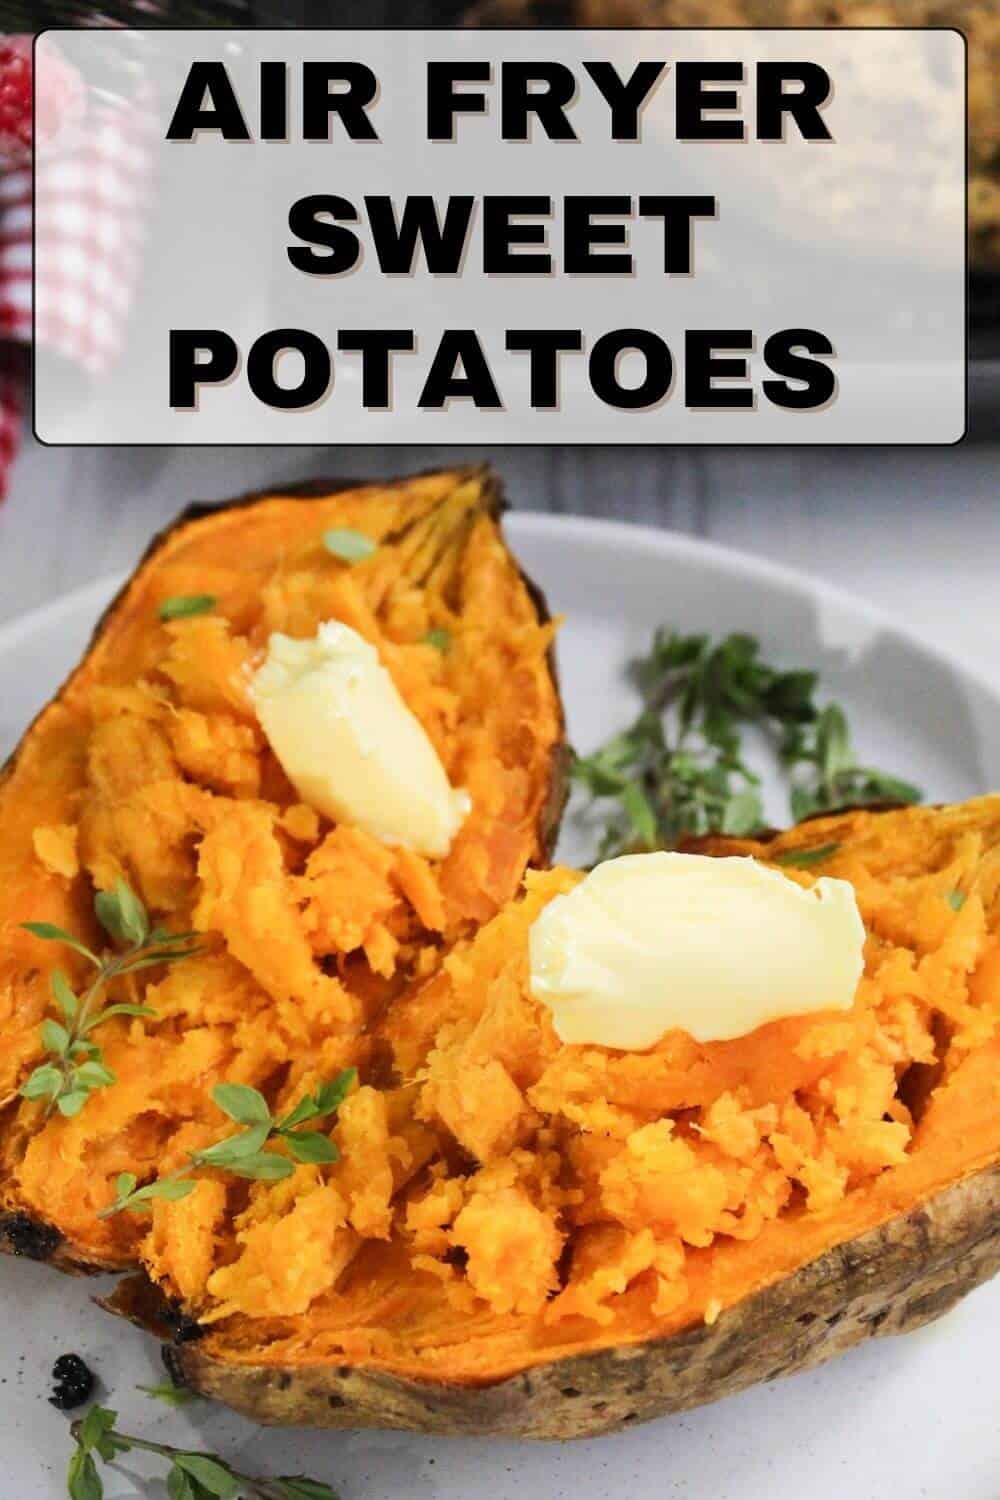 Air fryer sweet potatoes on a white plate.